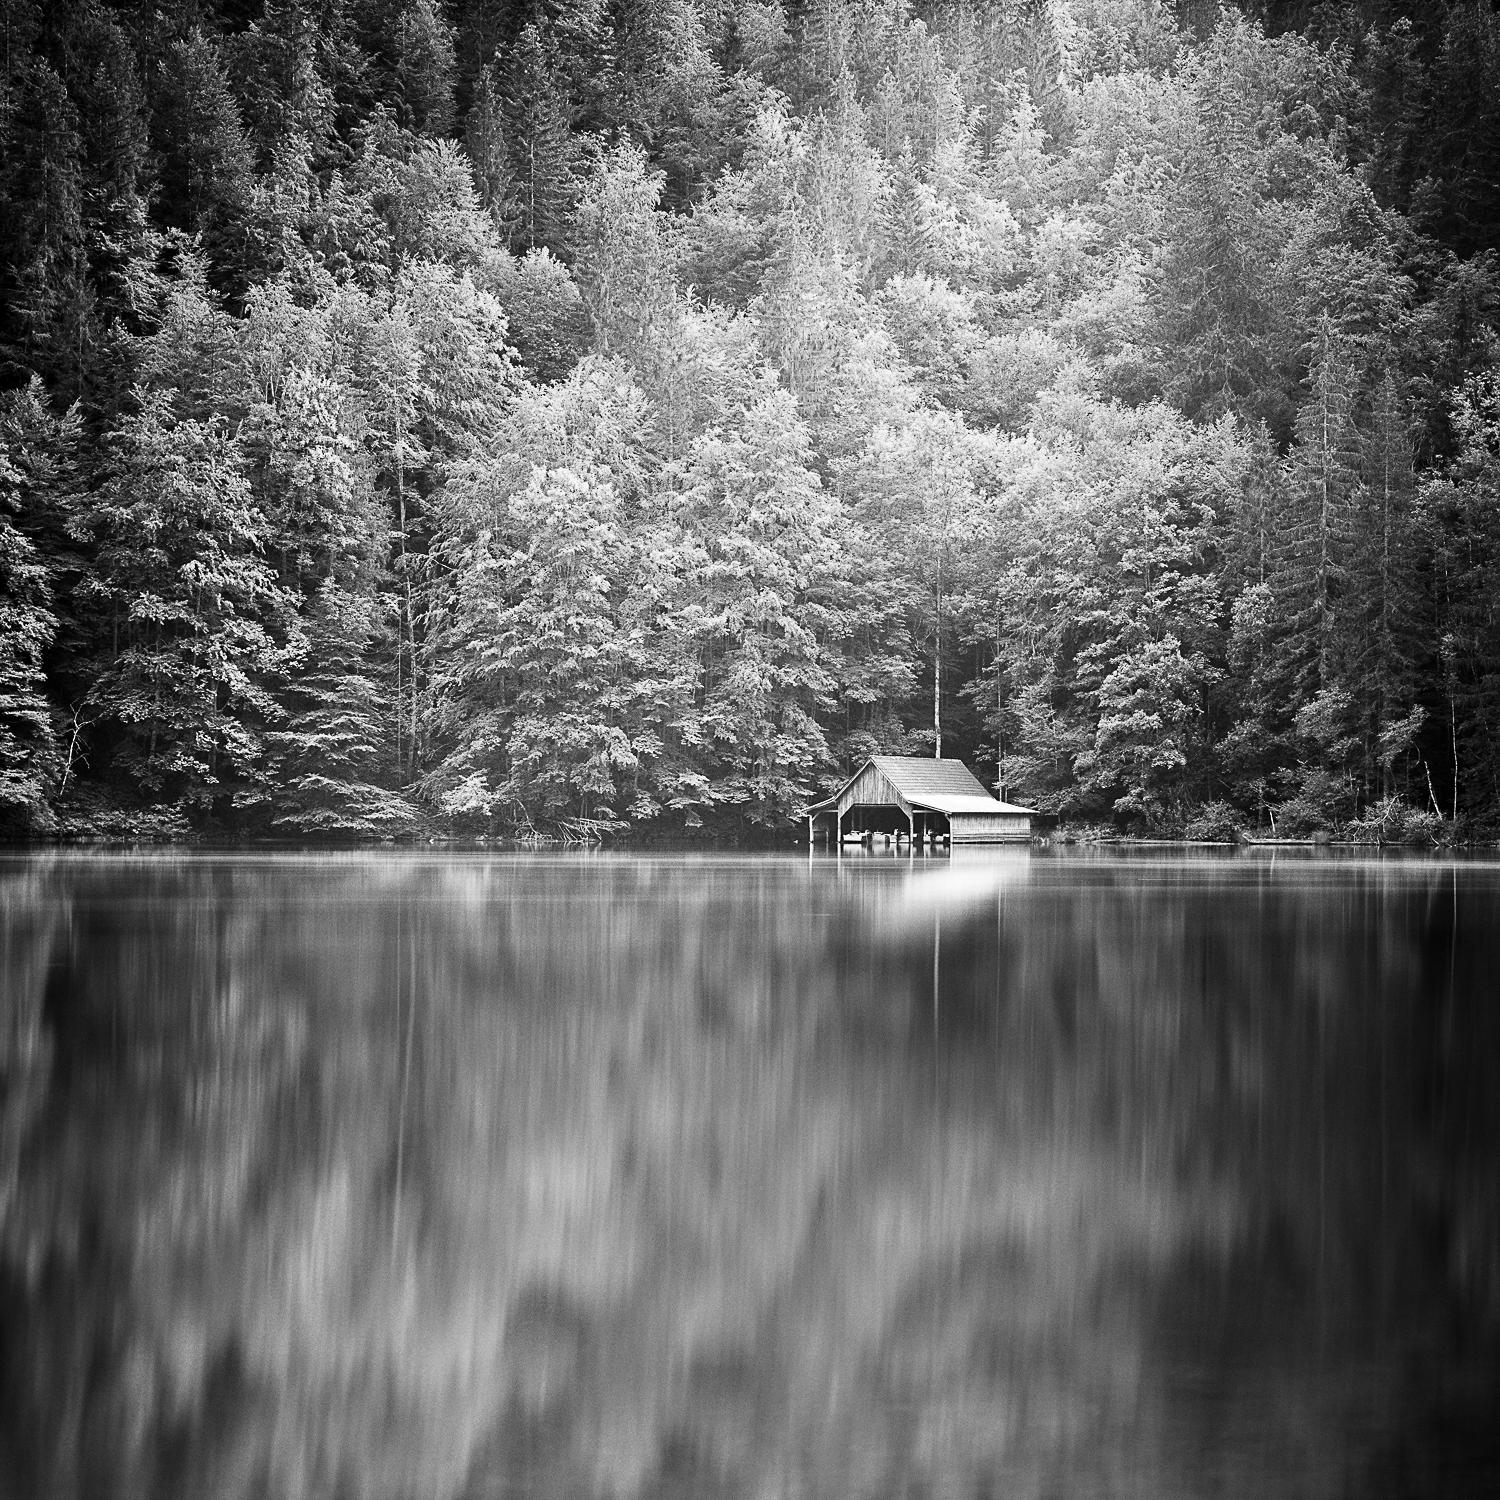 Boat House at Mountain Lake, Austria, b&w photography, fine art print, framed - Photograph by Gerald Berghammer